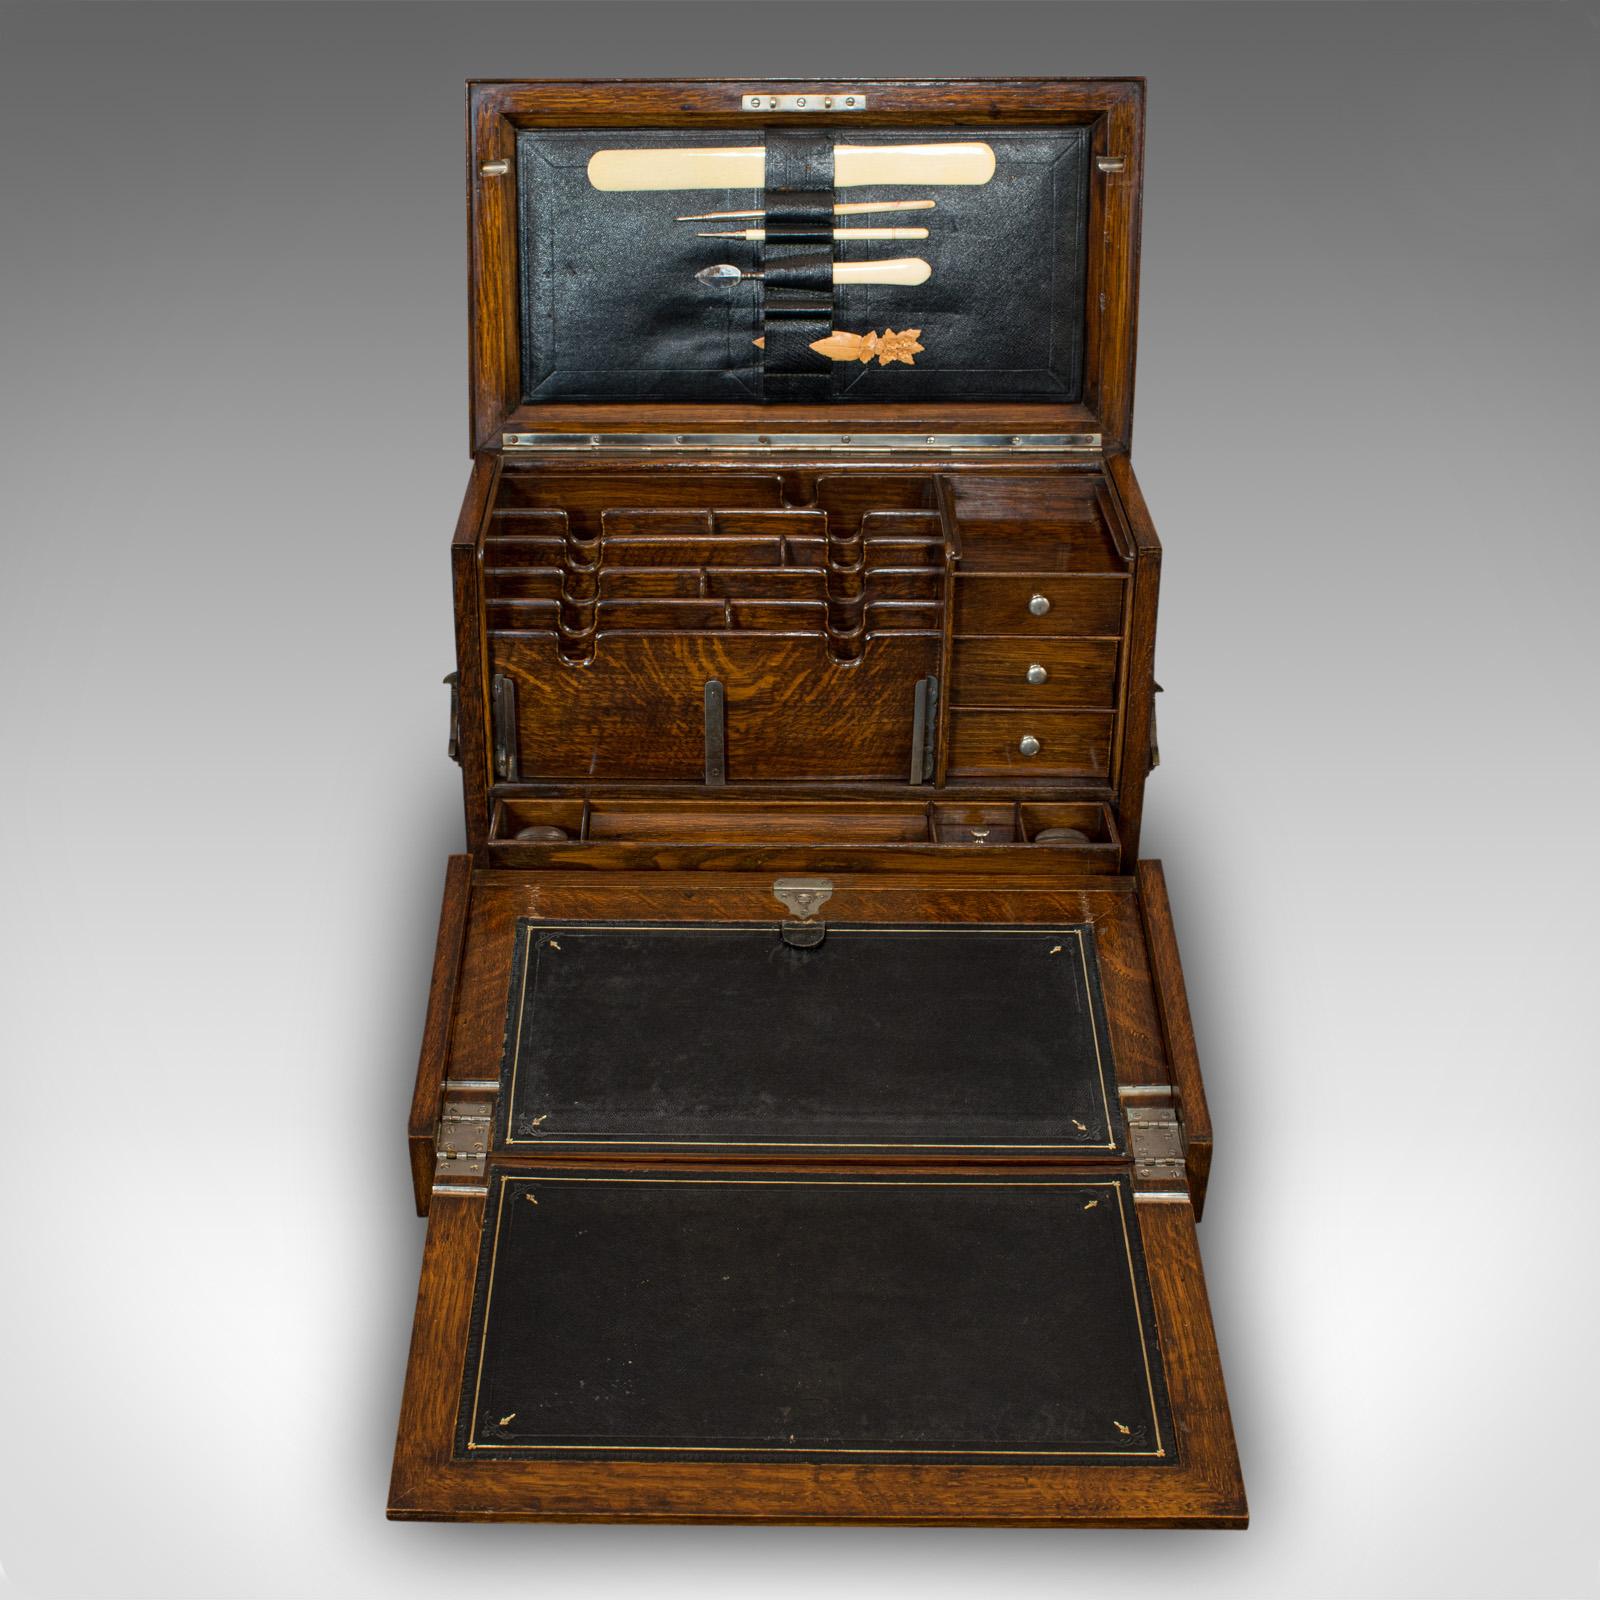 This is an antique writing slope. An English, oak travelling correspondence box, dating to the Edwardian period, circa 1910.

Quality writing slope encased in superb stocks of oak
Displays a desirable aged patina
Select oak shows fine grain